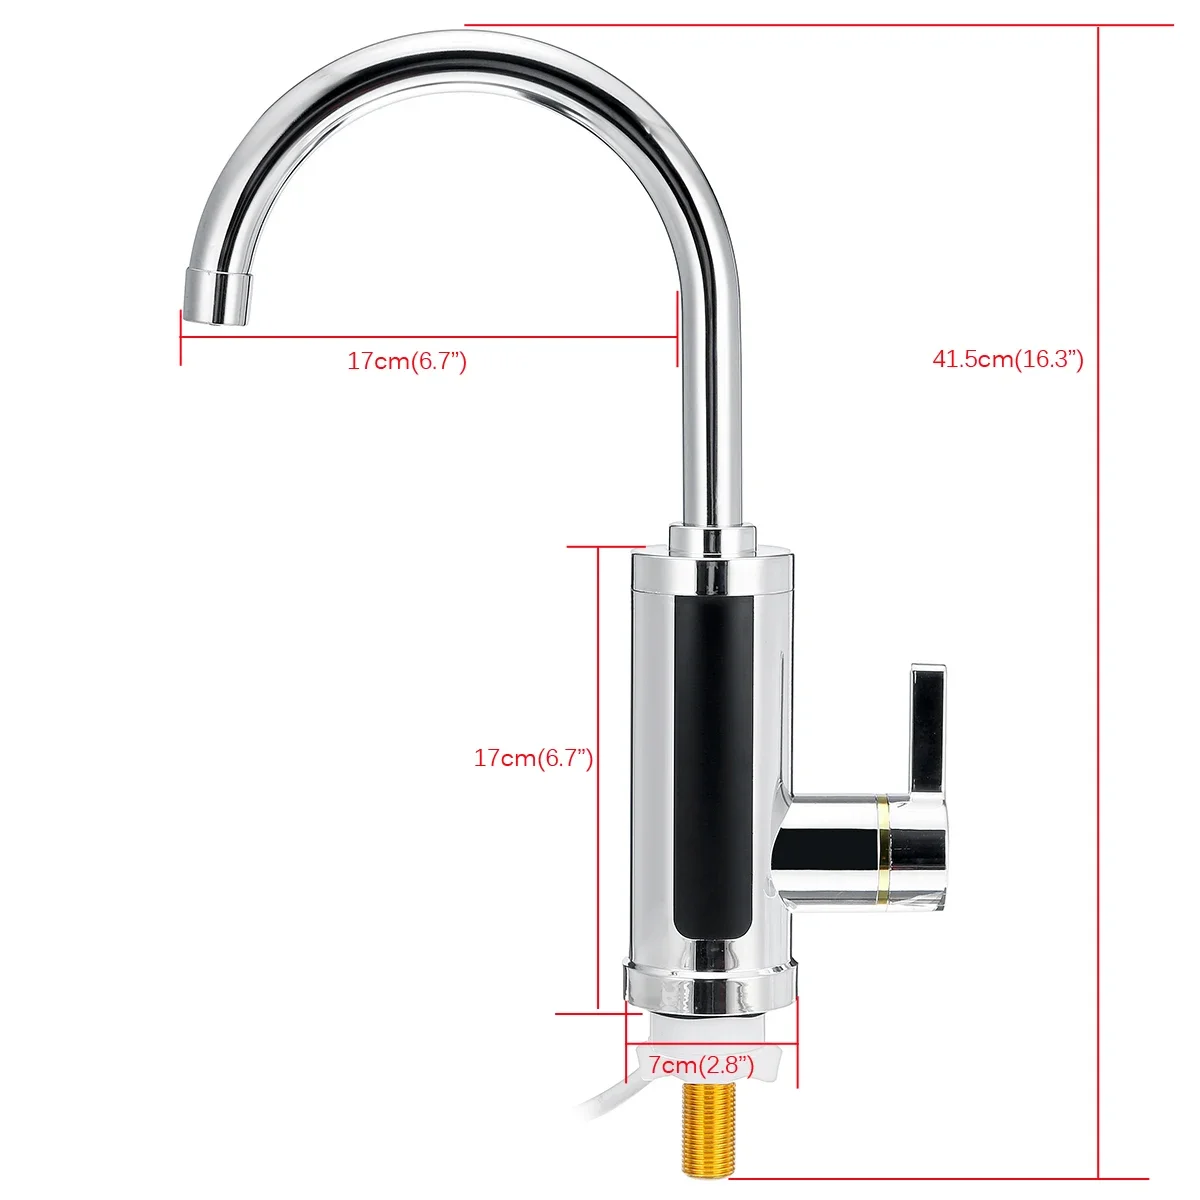 

220V 3000W Electric Kitchen Water Heater Tap Instant Hot Water Faucet Heater Cold Heating Faucet Tankless Water Heater with LED